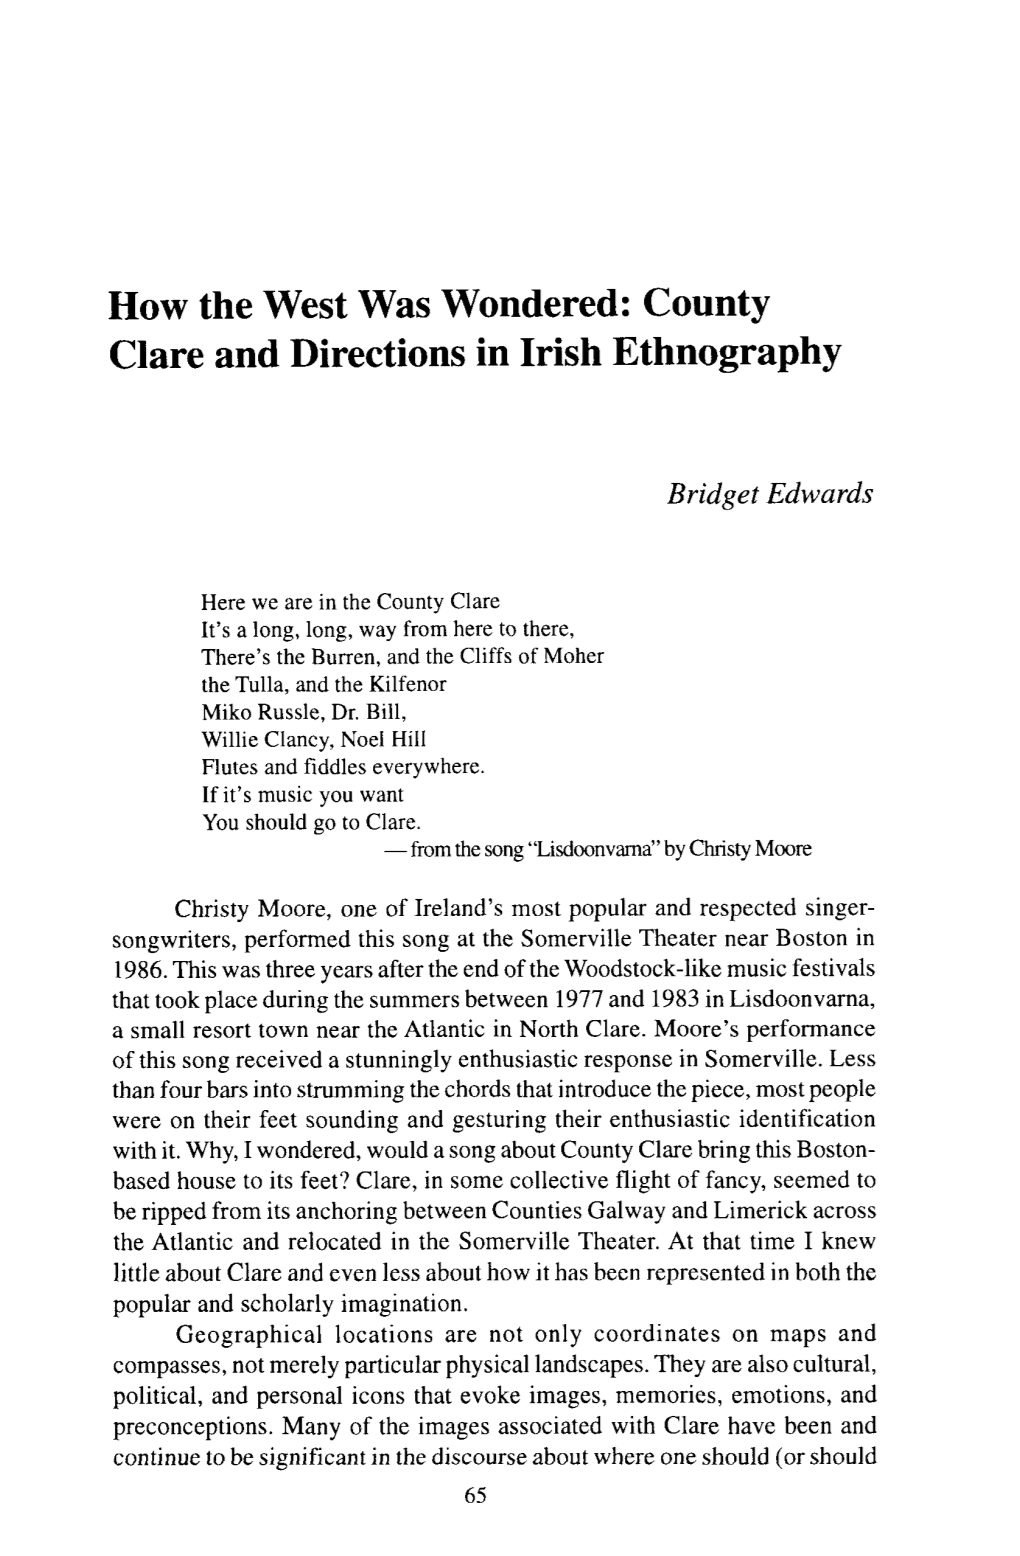 County Clare and Directions in Irish Ethnography